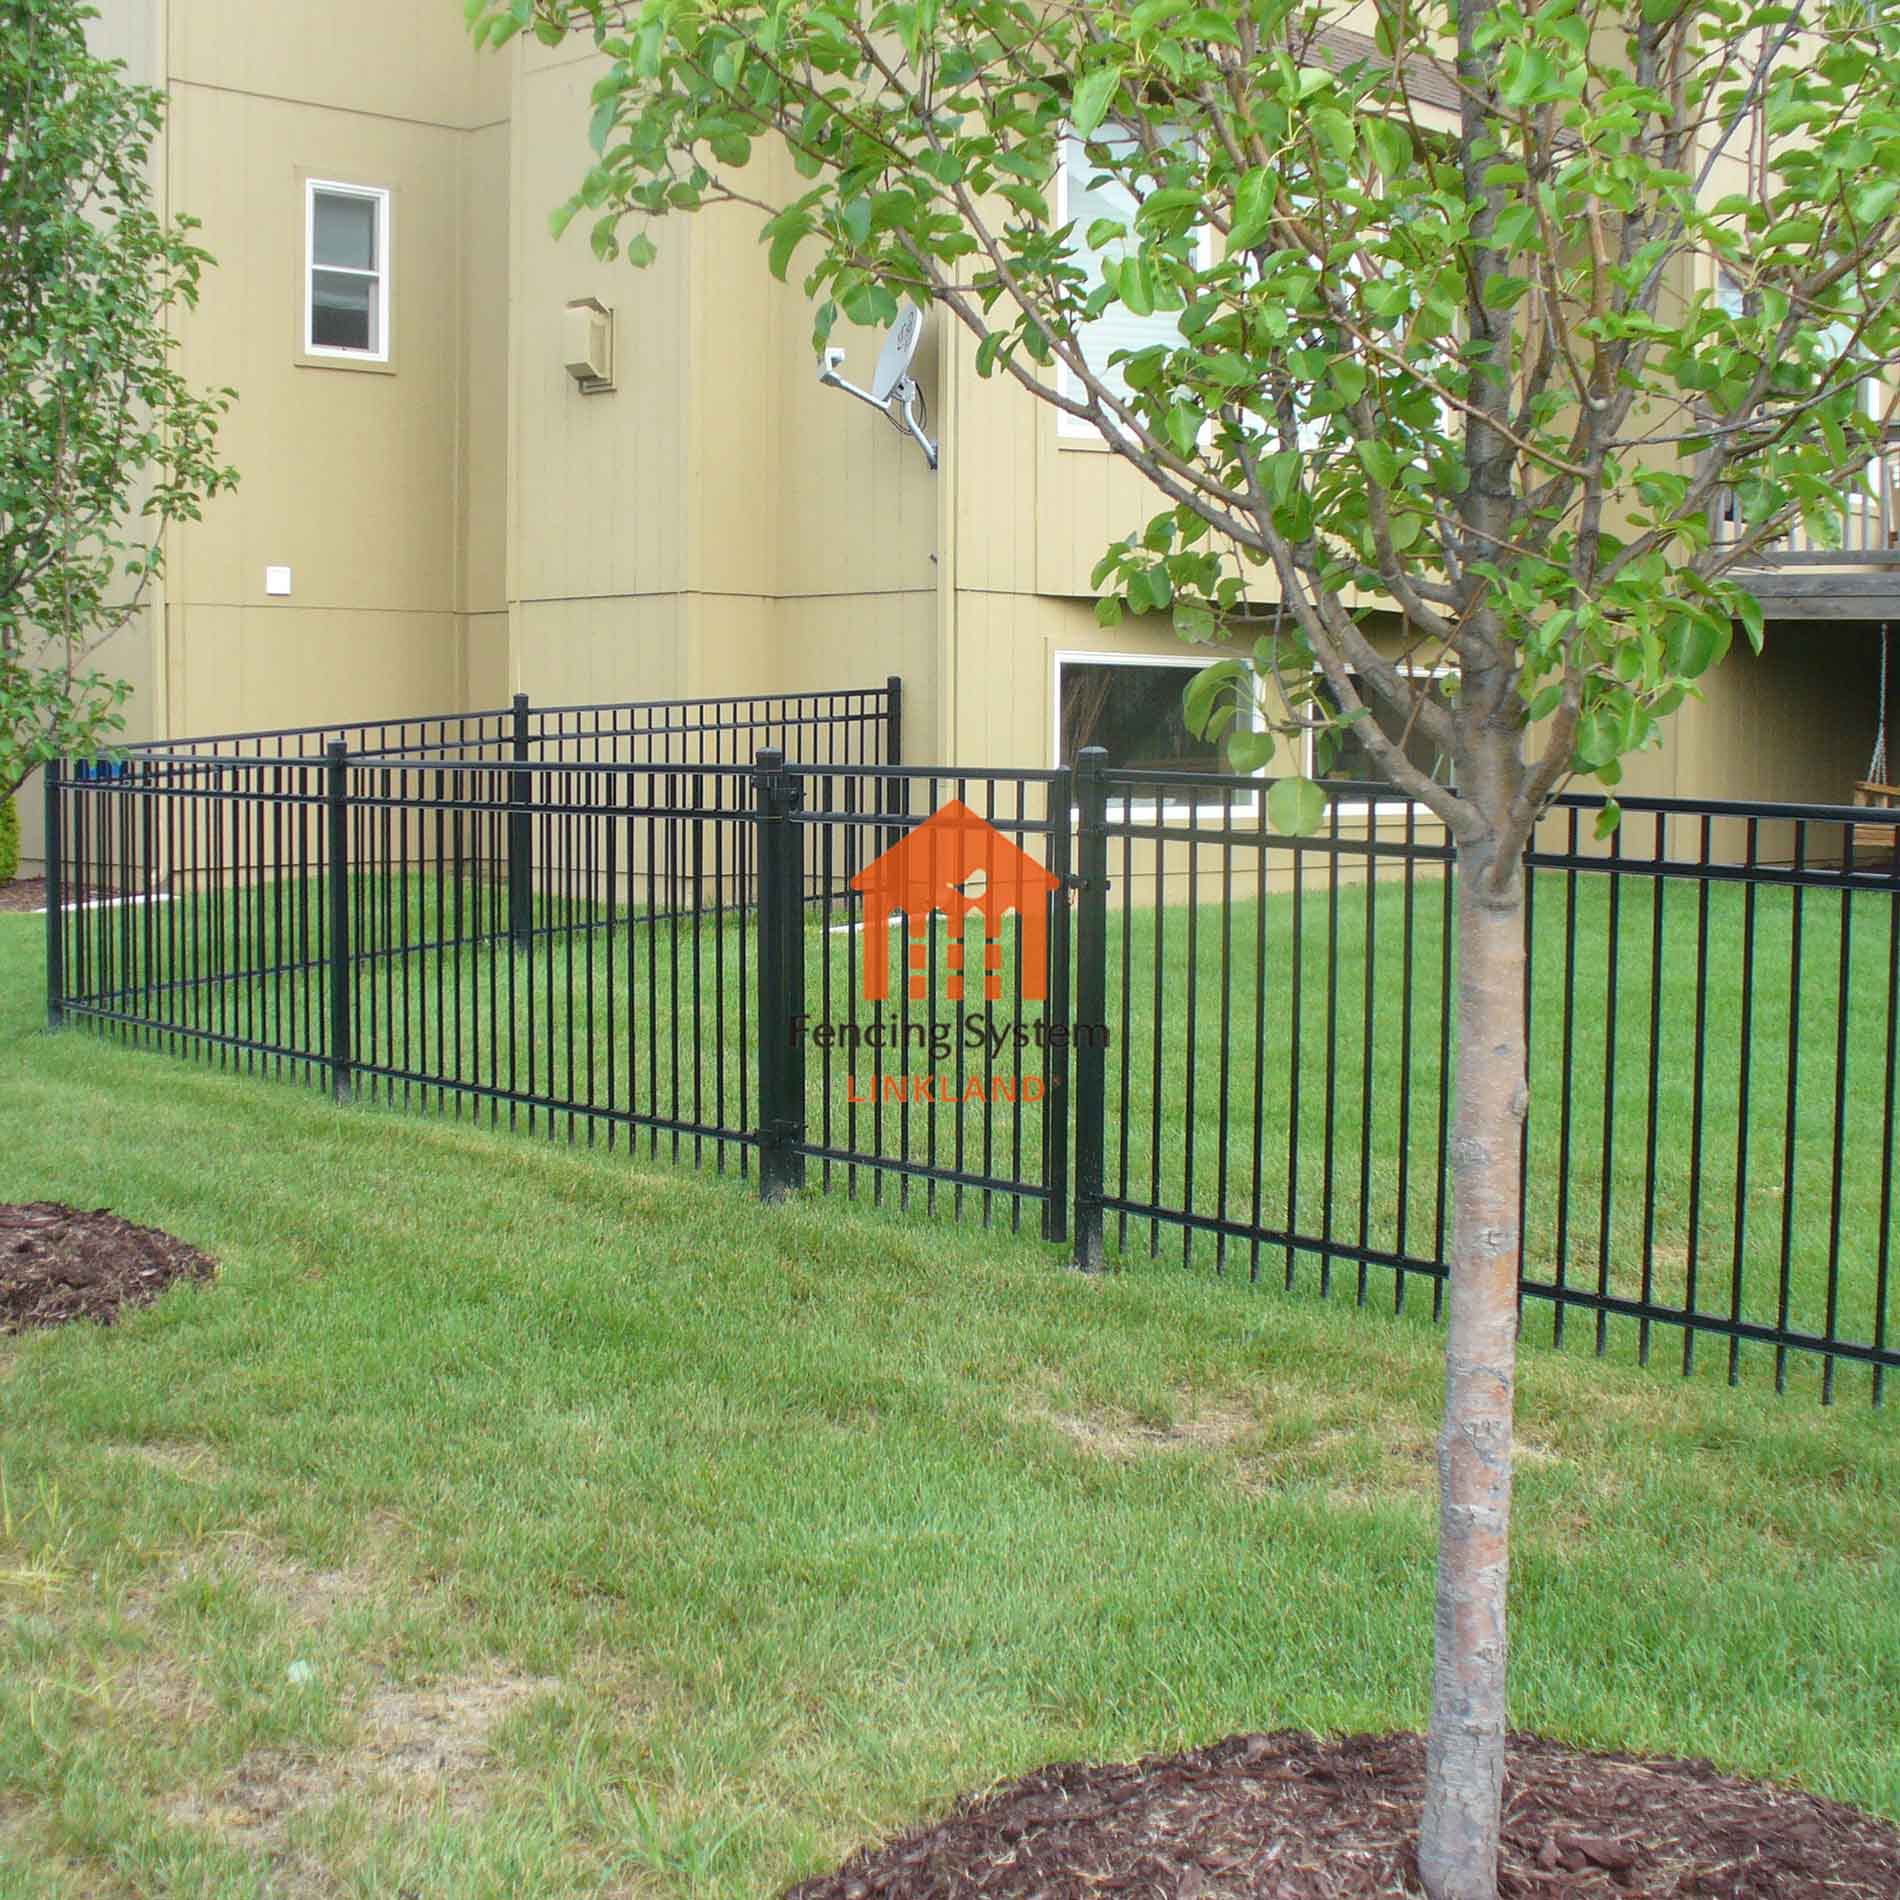 The Appeal of Wrought Iron Fence